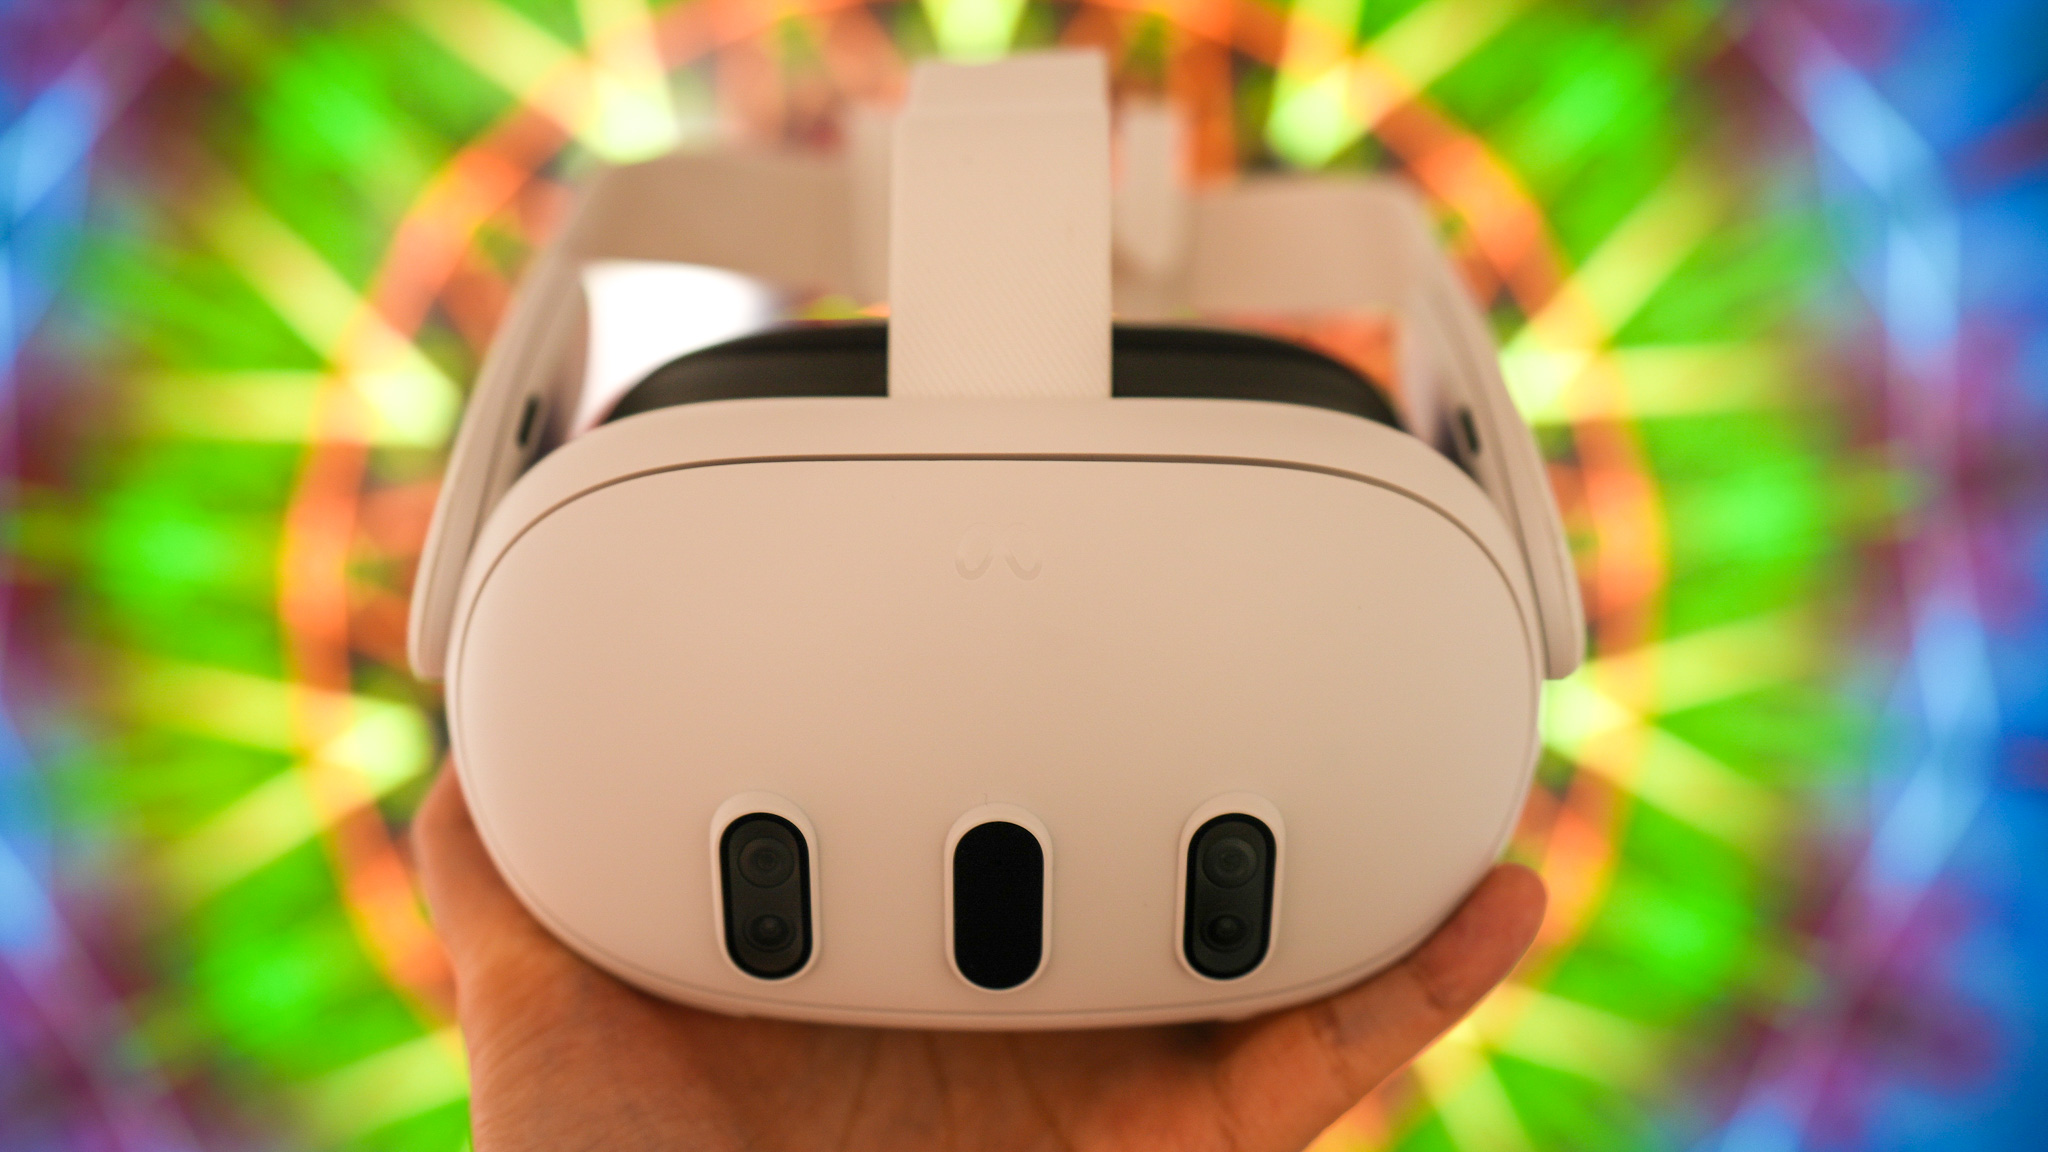 Is the Meta Quest 2 still worth it? Our verdict on the VR headset